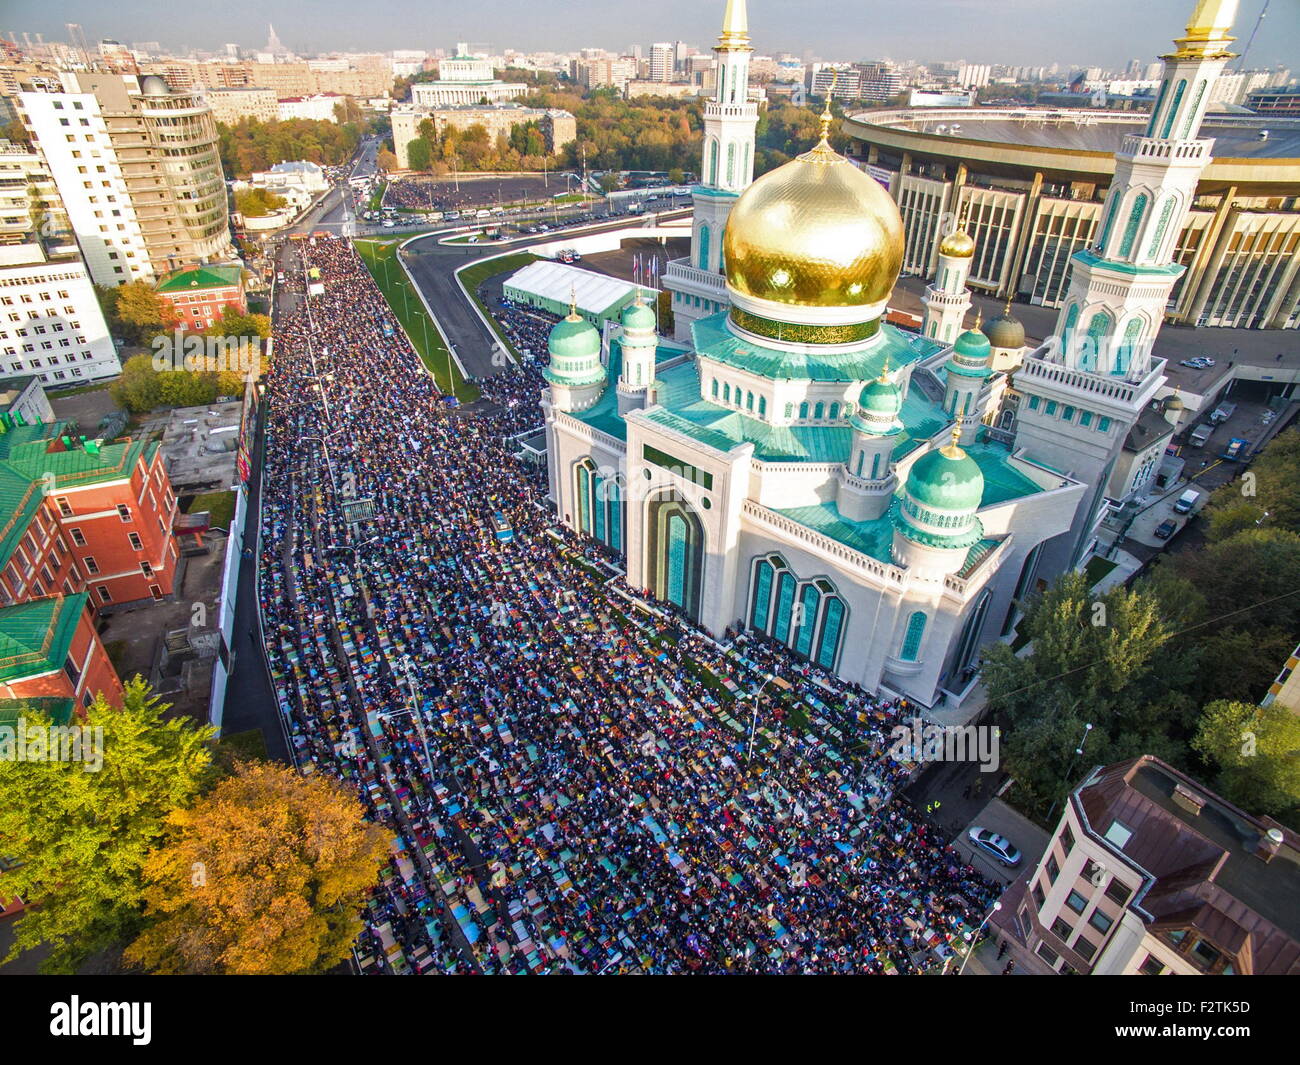 moscow-russia-24th-sep-2015-an-aerial-view-of-muslims-praying-outside-F2TK5D.jpg